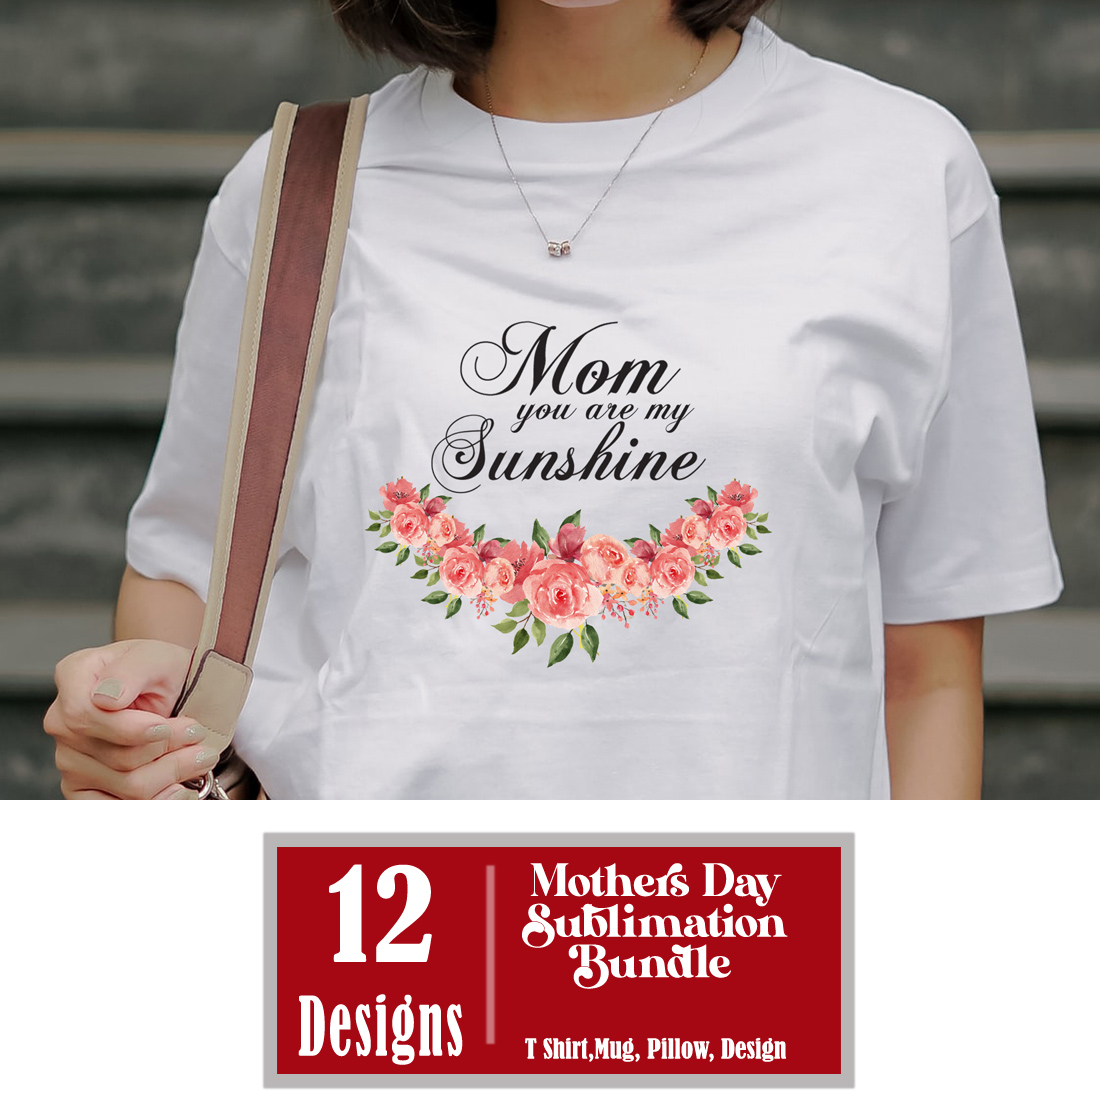 Mothers Day Sublimation- T-Shirt-Mug-Pillow Design cover image.